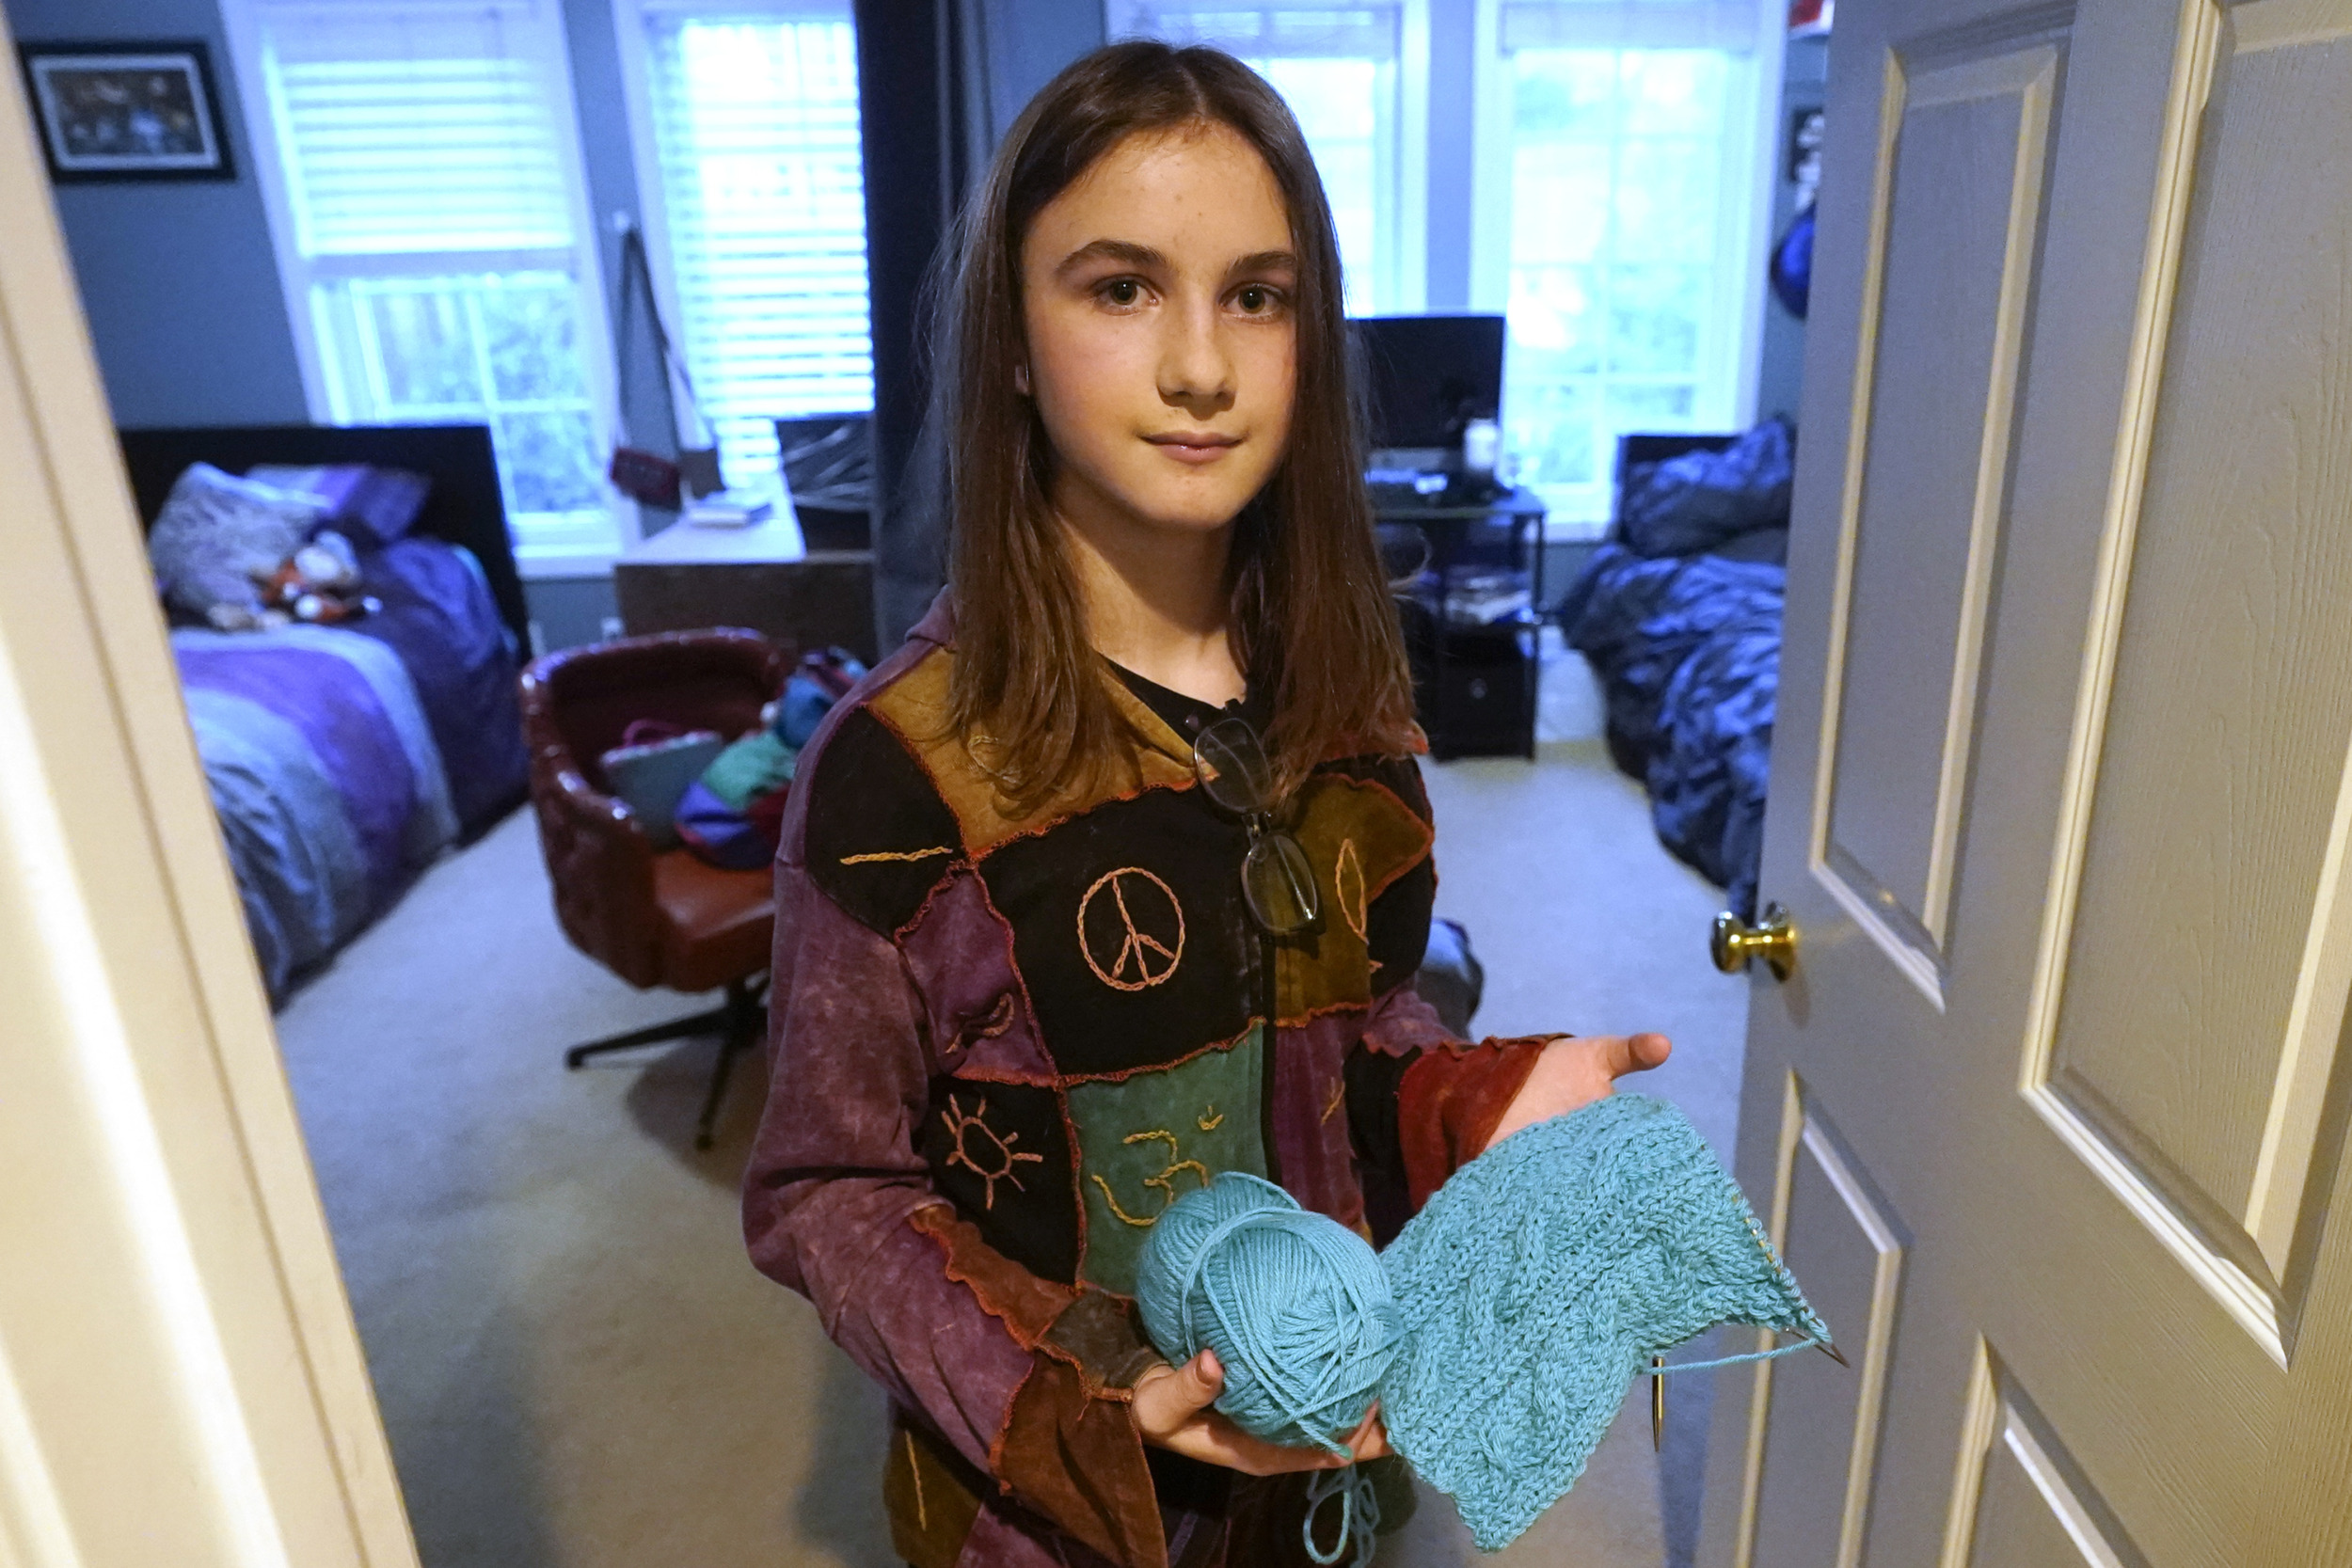 Transgender treatment for kids: Young person with long. dark hair in dark top holdsball and skein of bright turquoise yarn while standing in doorway to a bedroom